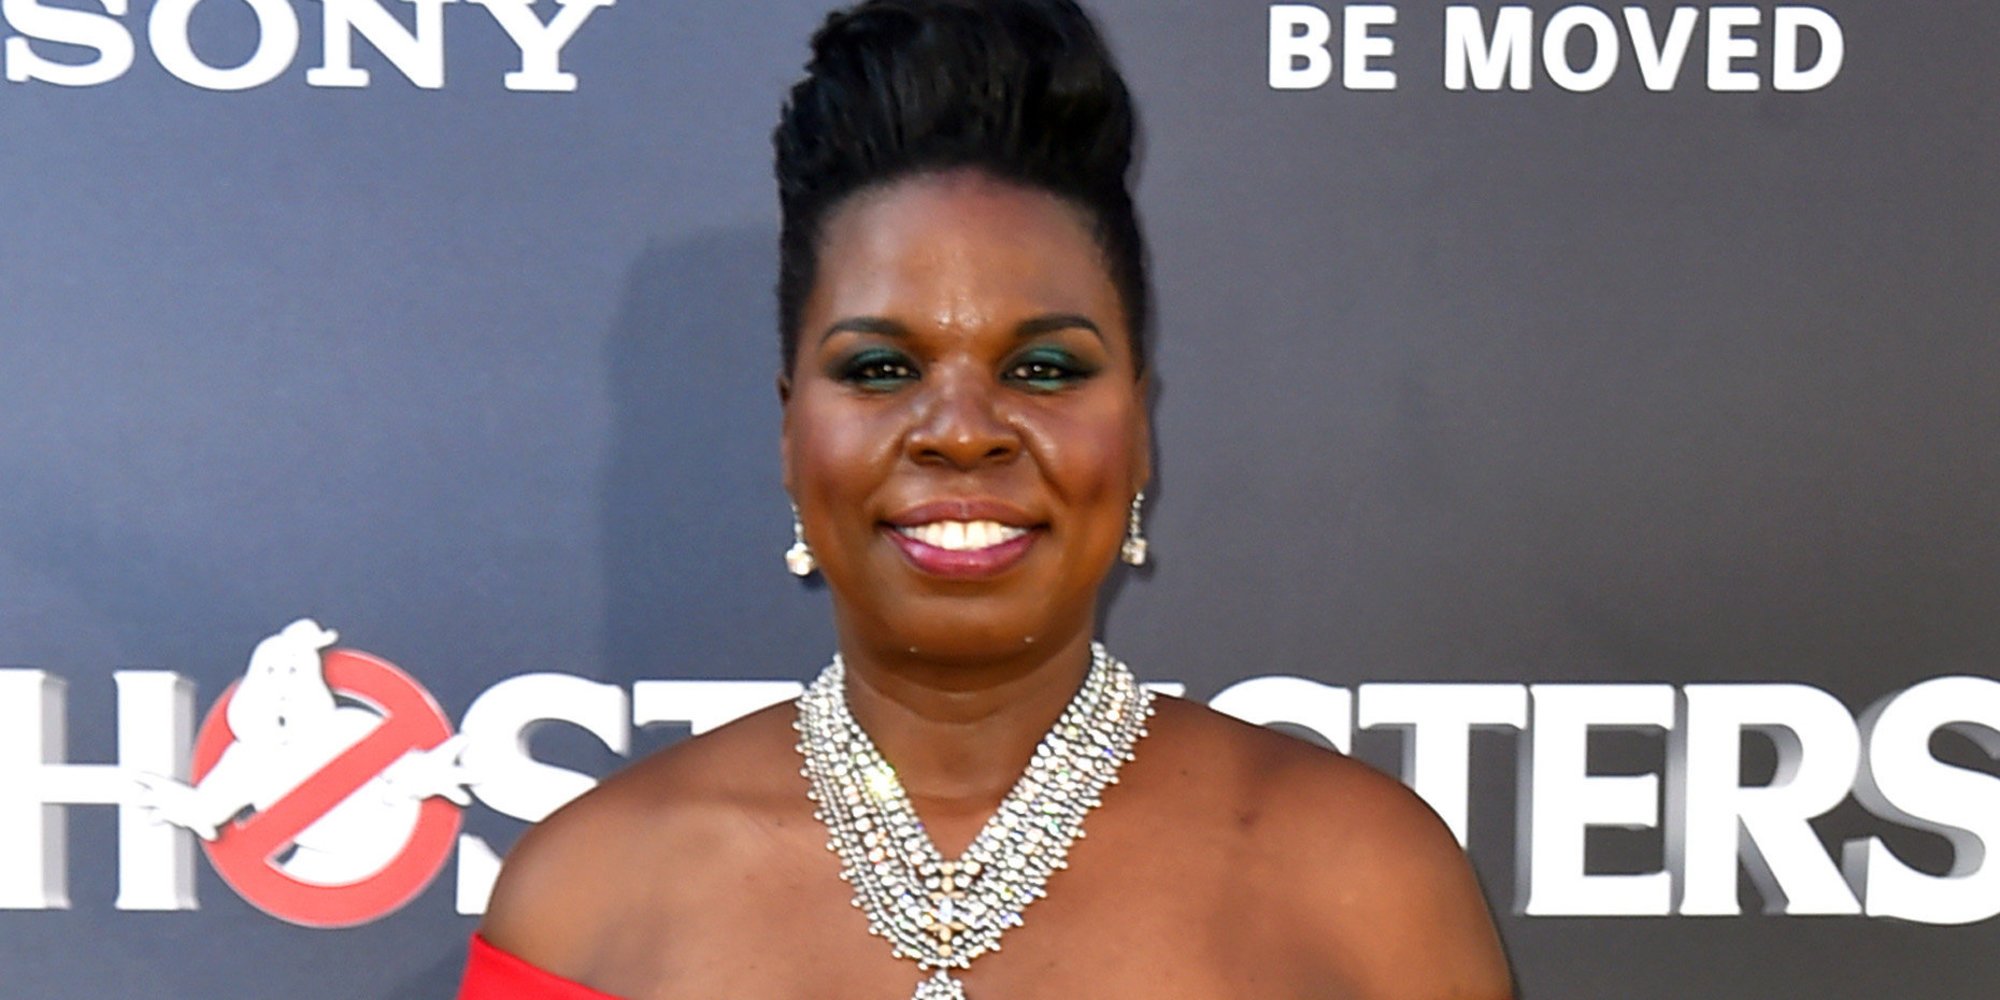 Twitter finally defended Leslie Jones, but its harassment problem continues...